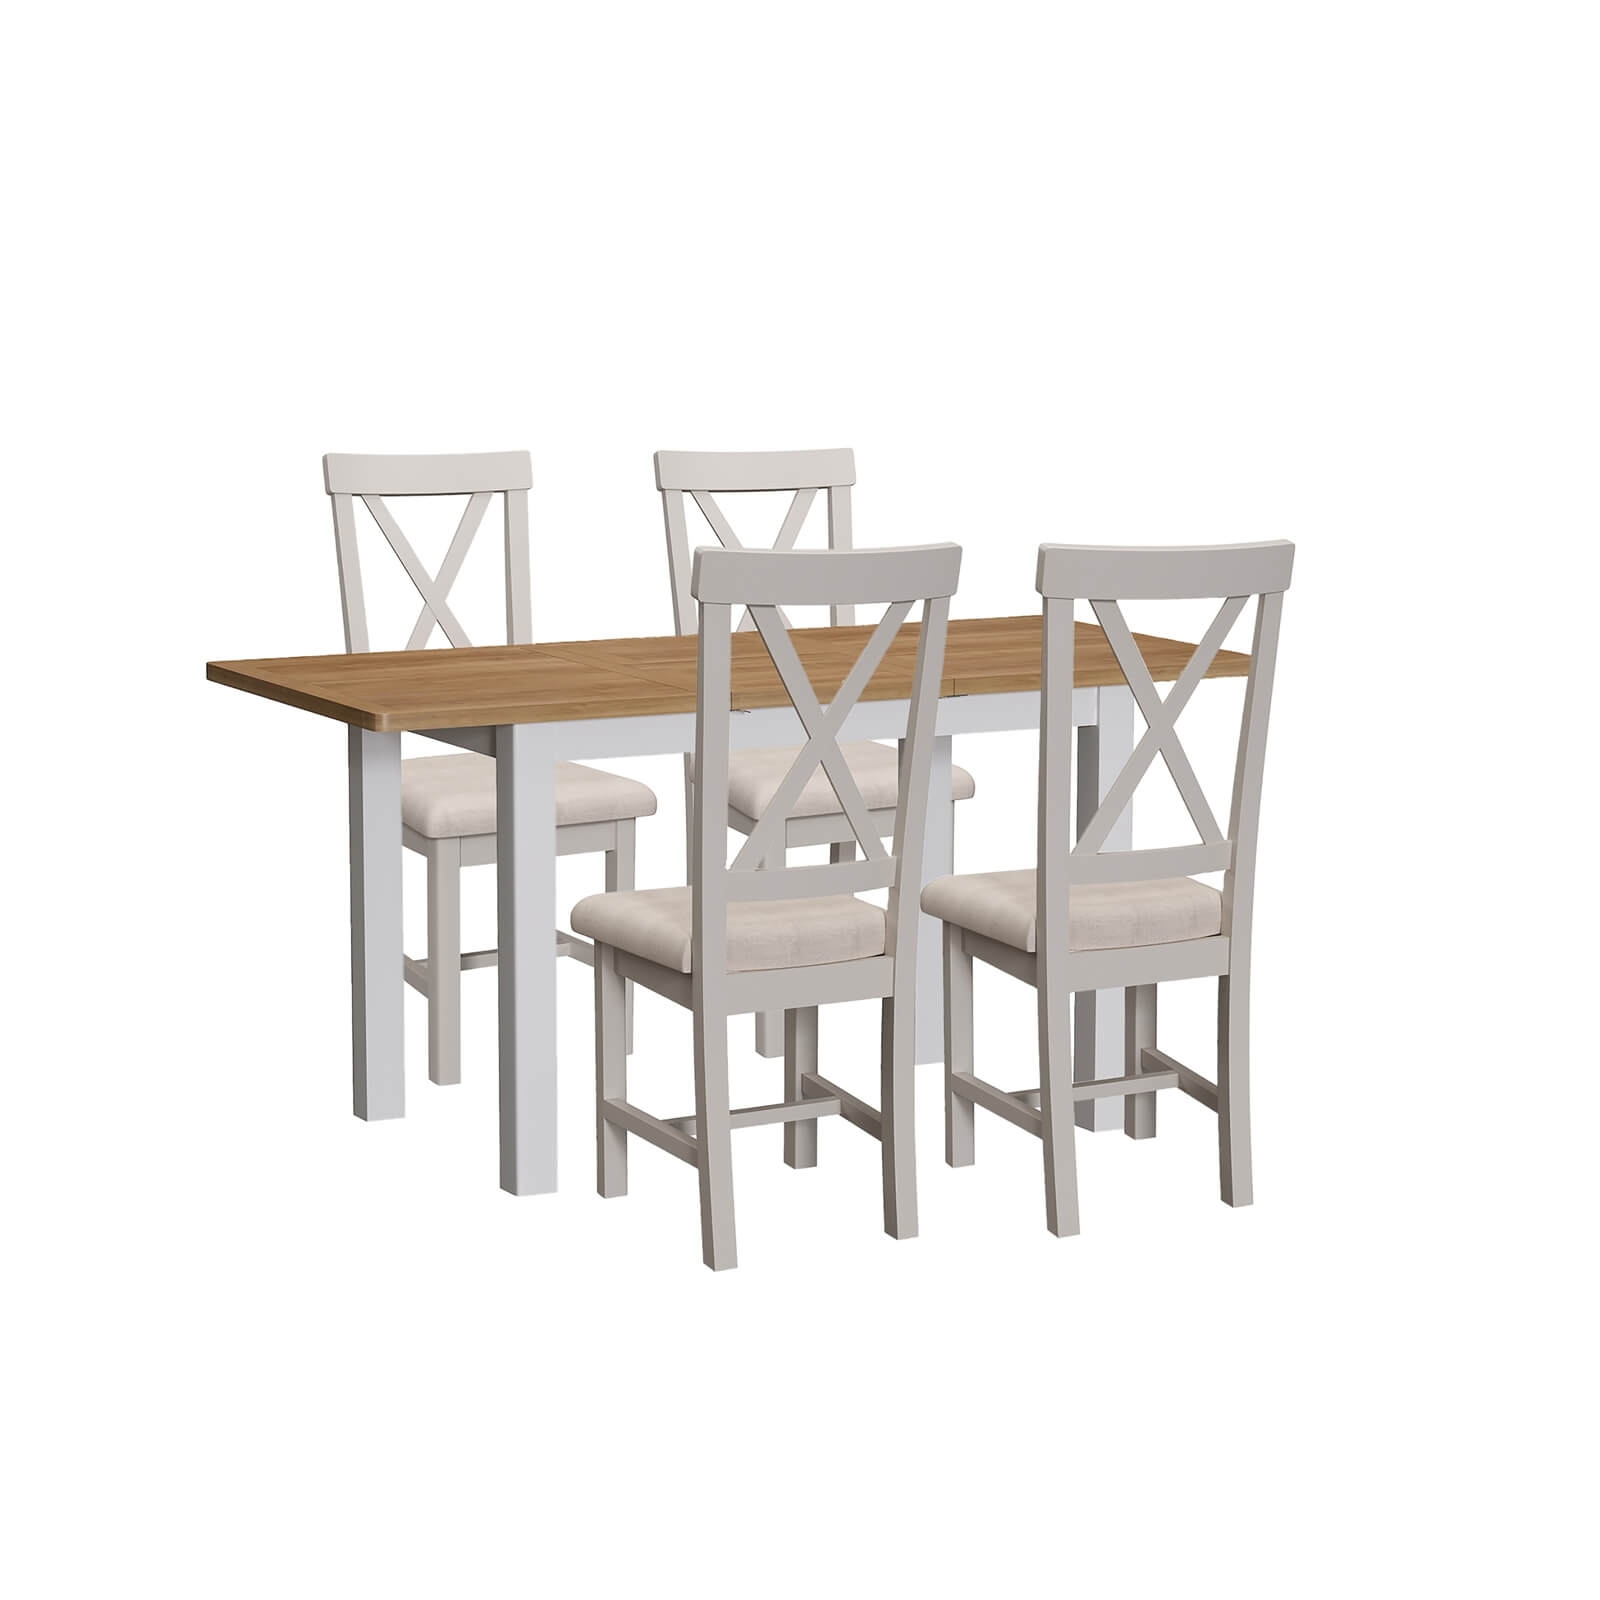 Padstow 1.2m Extending 4 Seater Dining Set - Grey